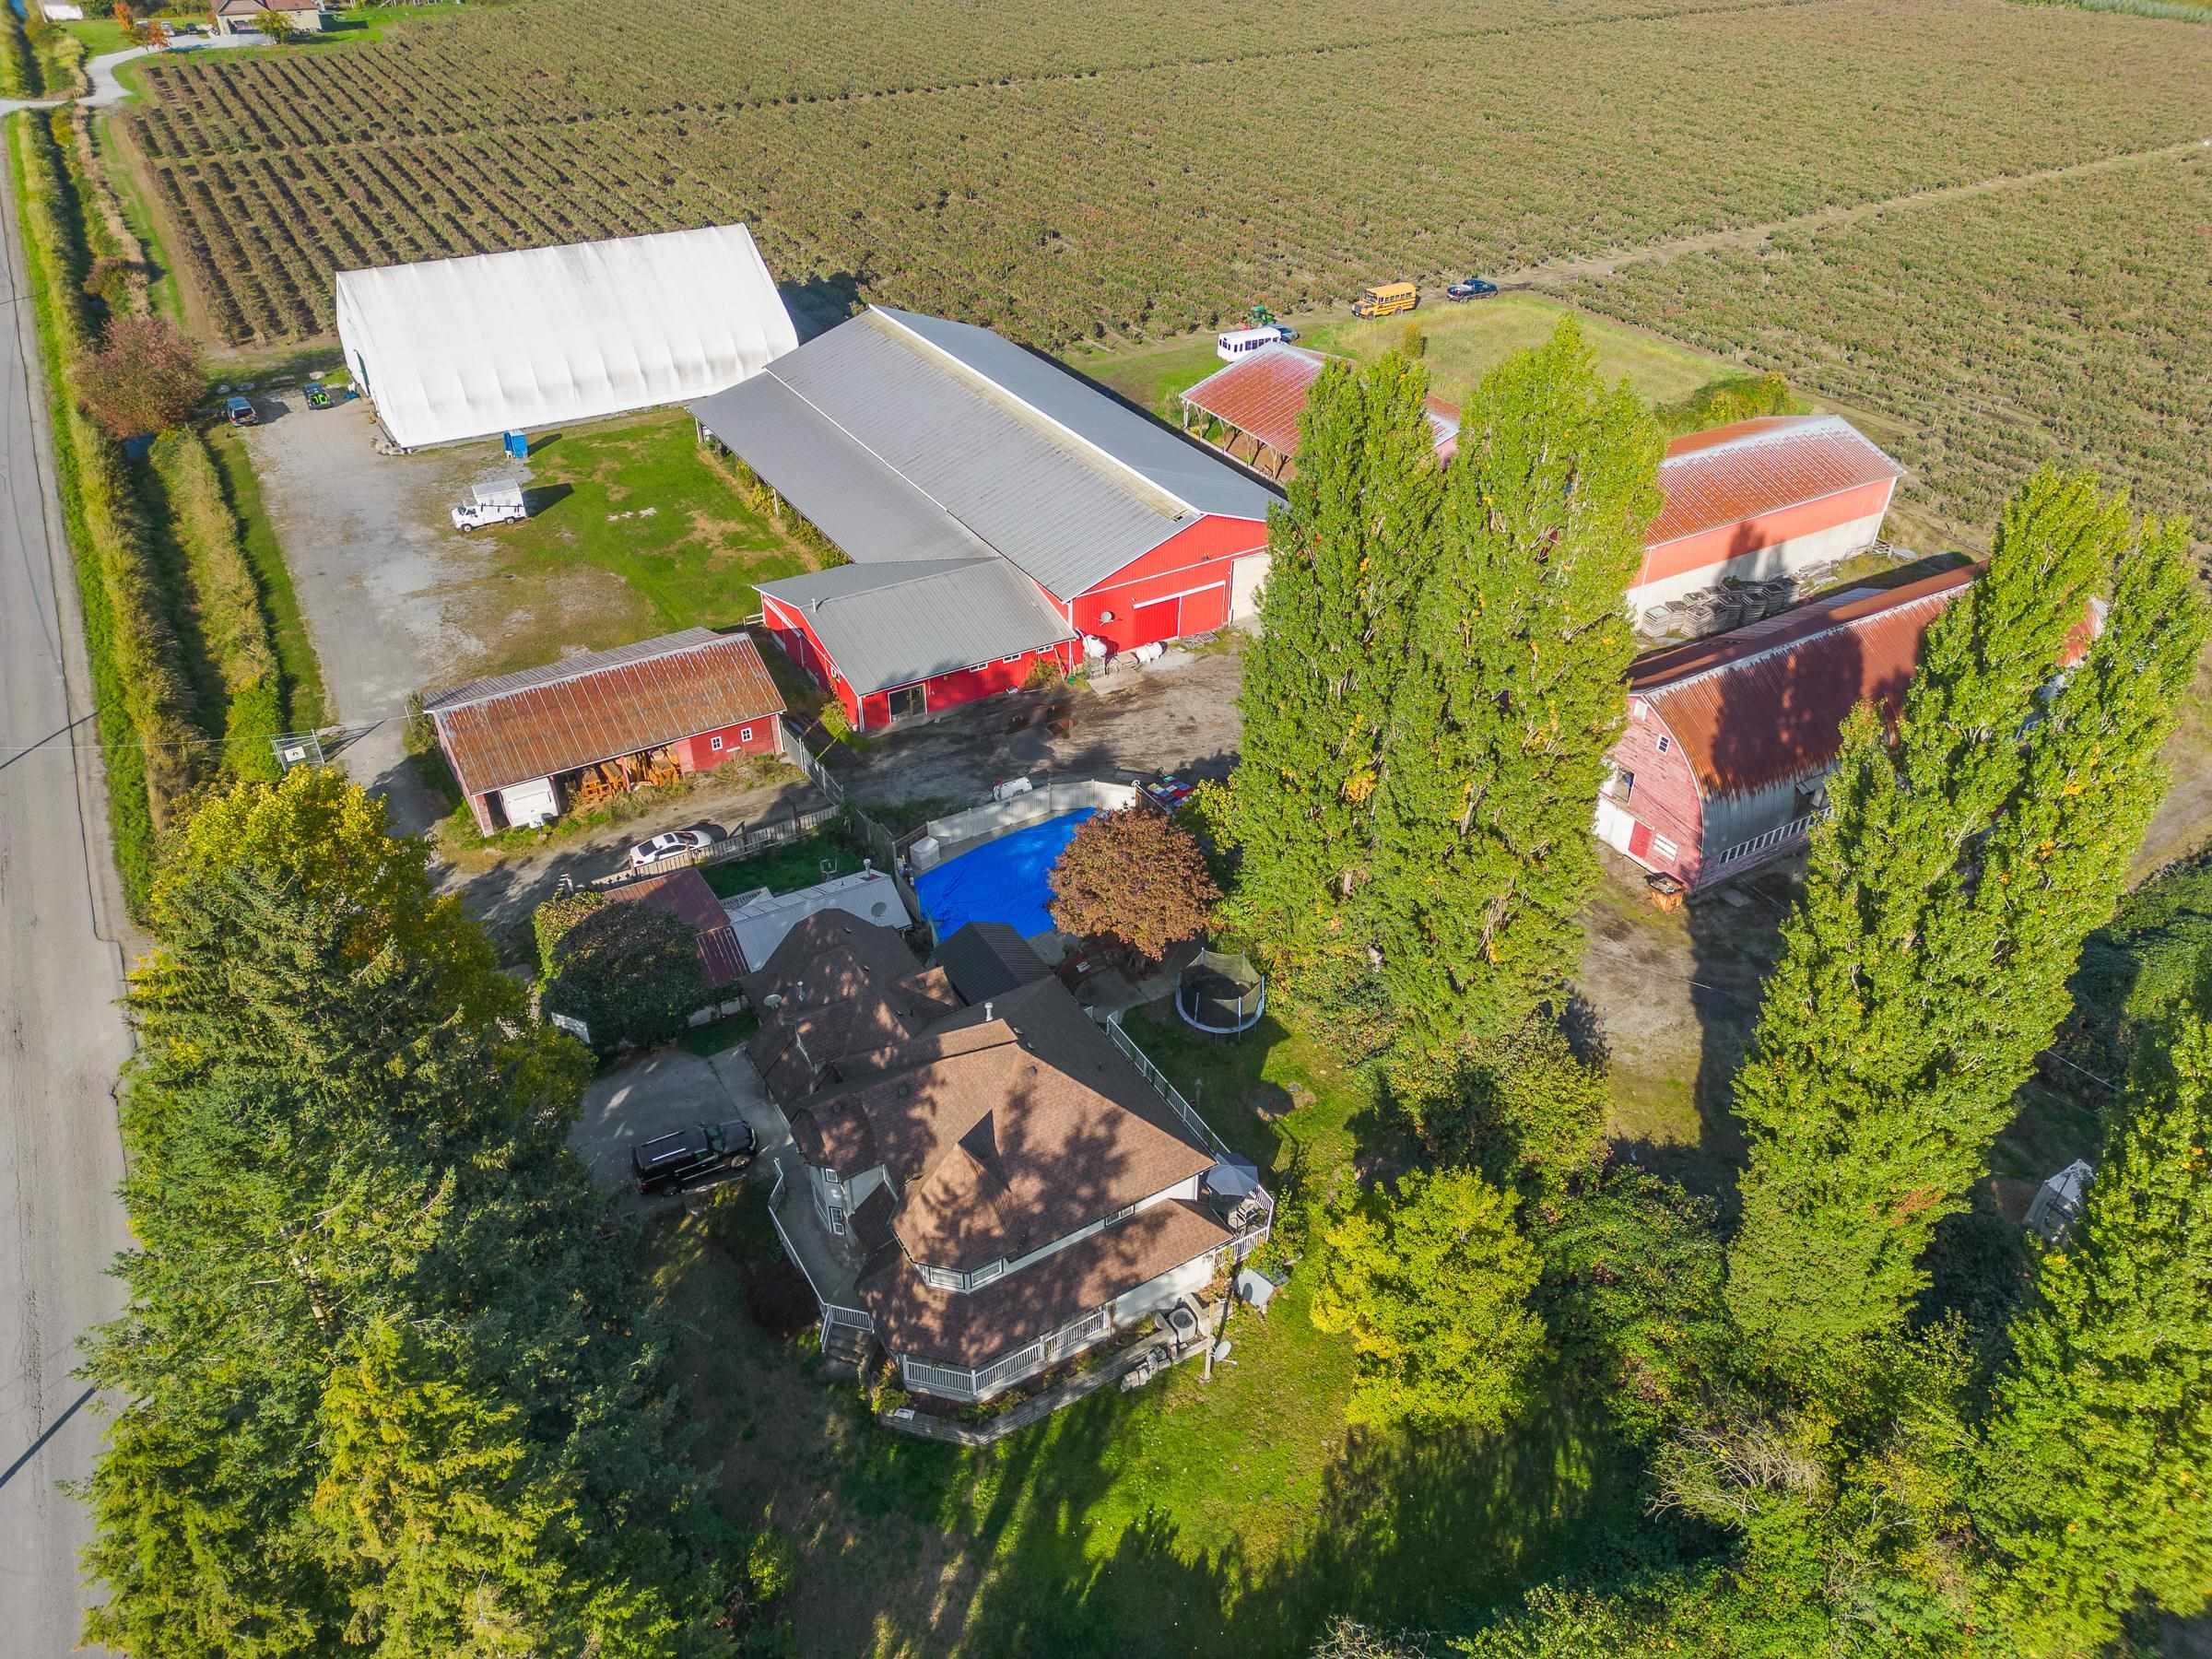 Main Photo: 13222 SHARPE Road in Pitt Meadows: North Meadows PI Agri-Business for sale : MLS®# C8057437